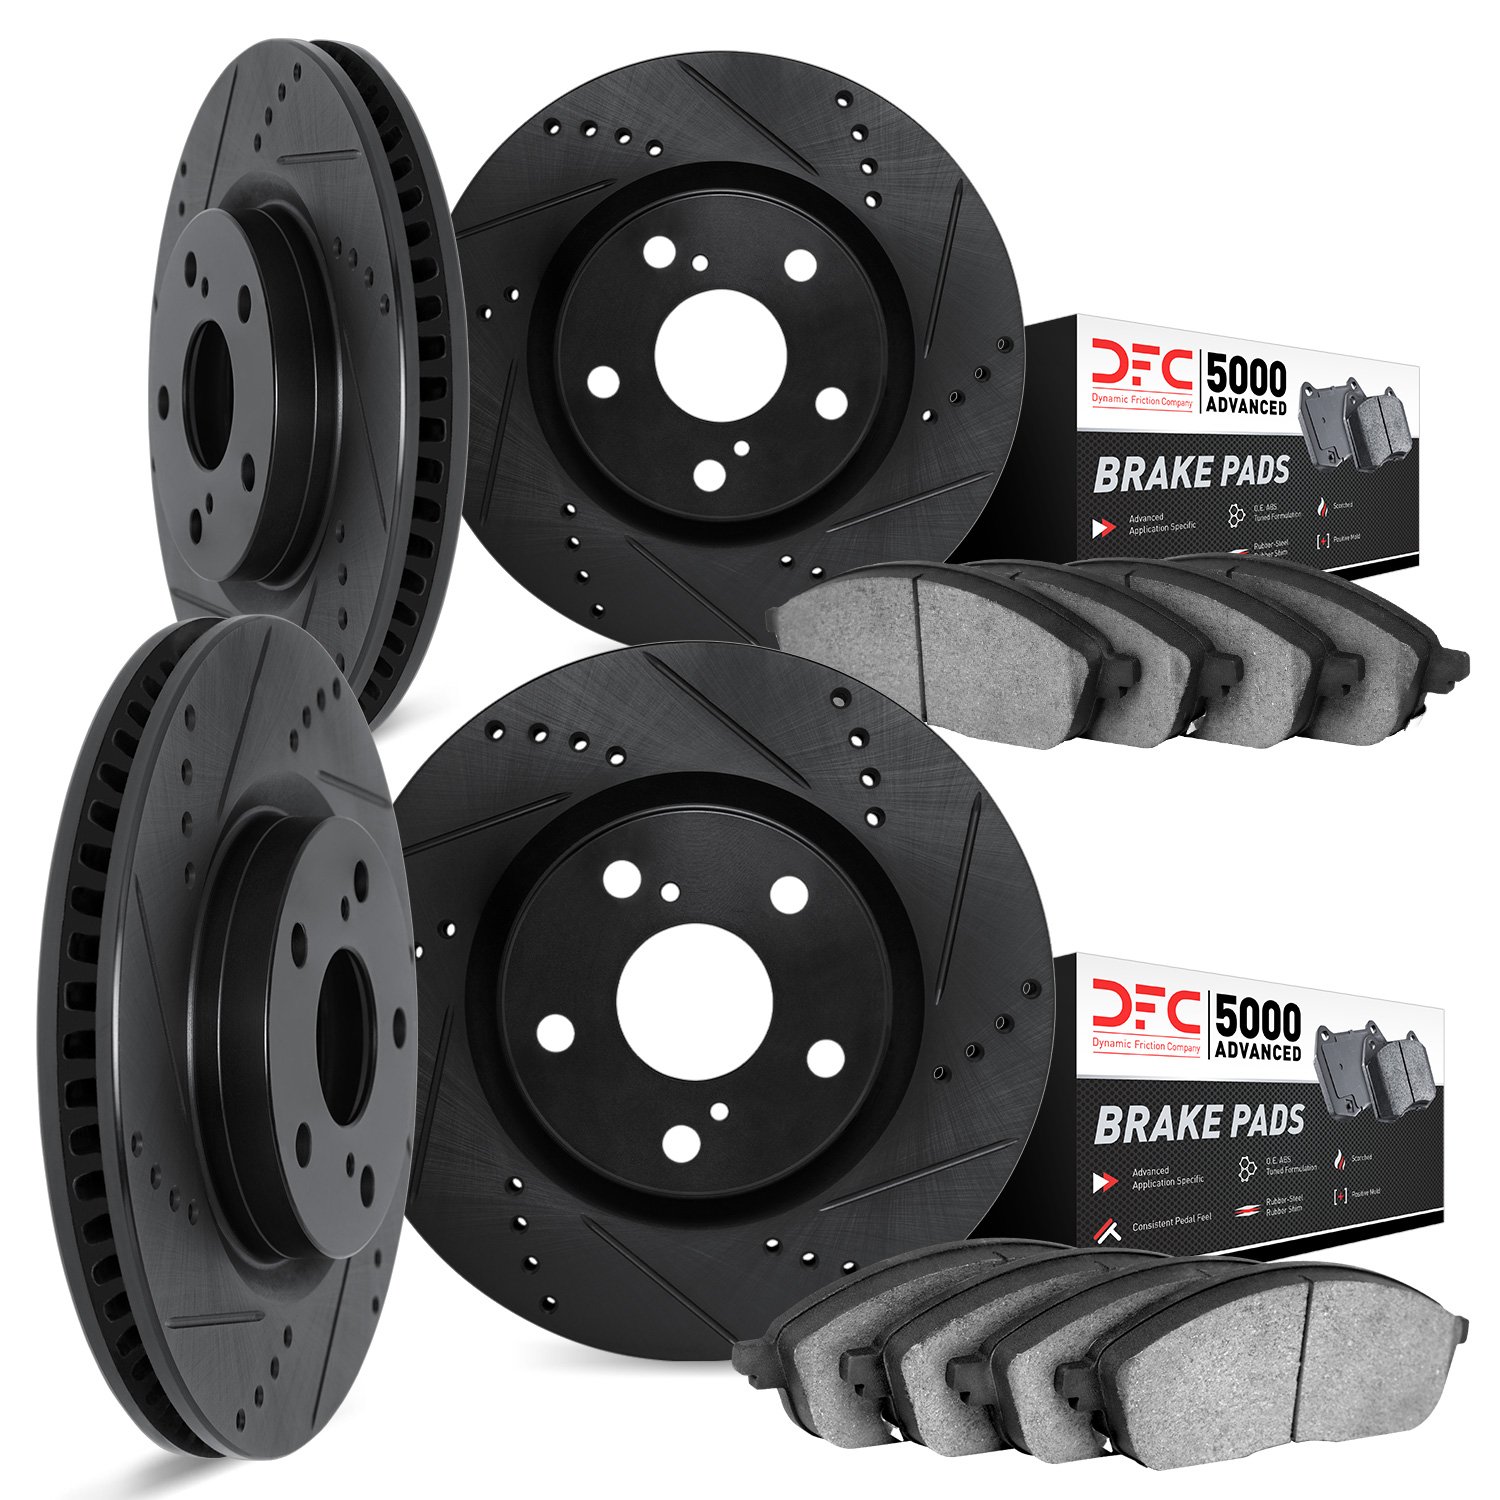 8504-46017 Drilled/Slotted Brake Rotors w/5000 Advanced Brake Pads Kit [Black], 2009-2011 GM, Position: Front and Rear